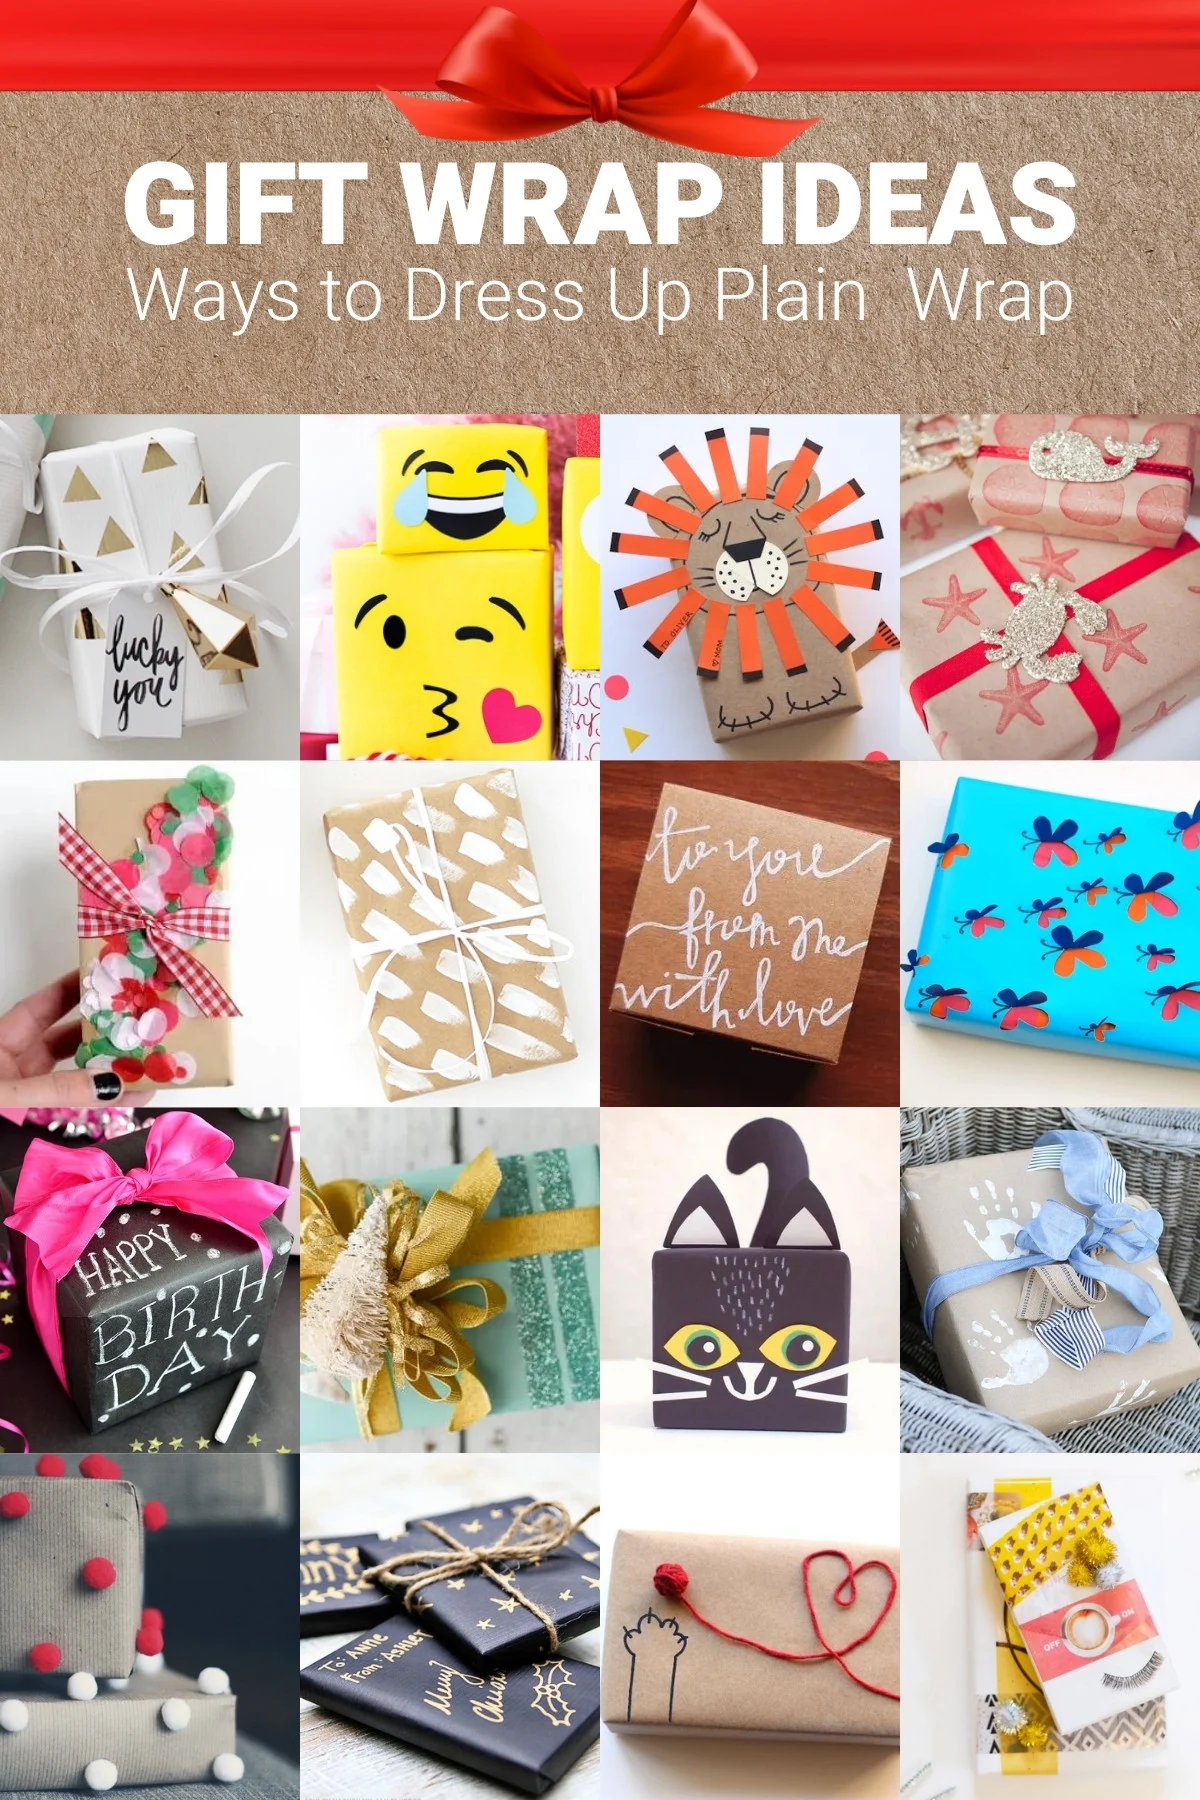 40+ Gift Wrap Ideas for the Holidays and More - Mod Podge Rocks